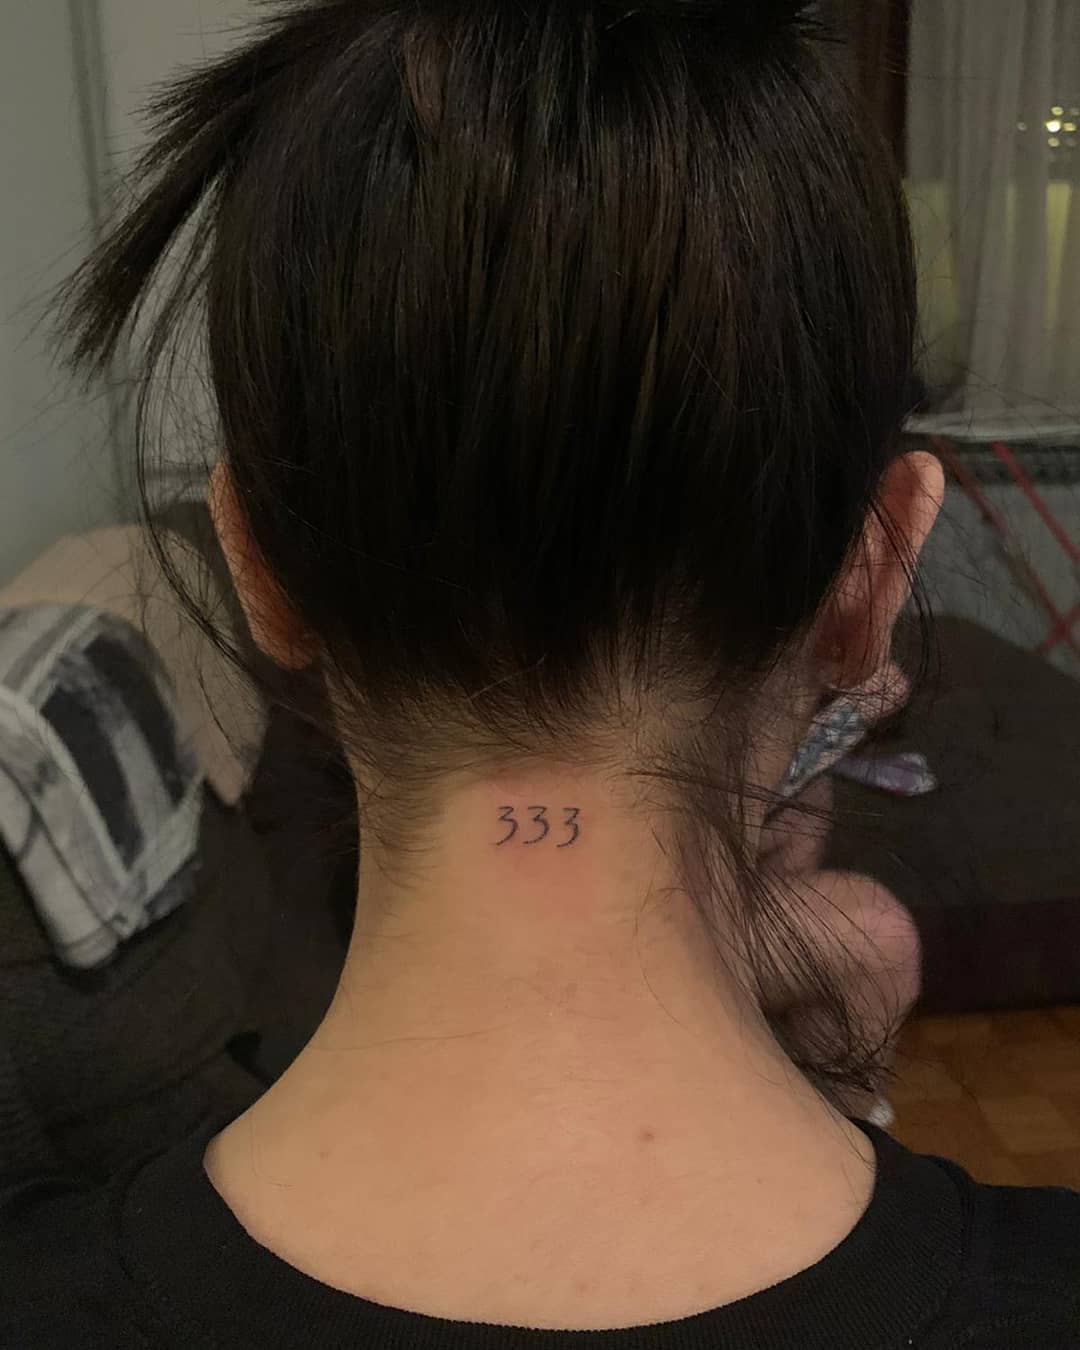 333 behind the neck tattoo